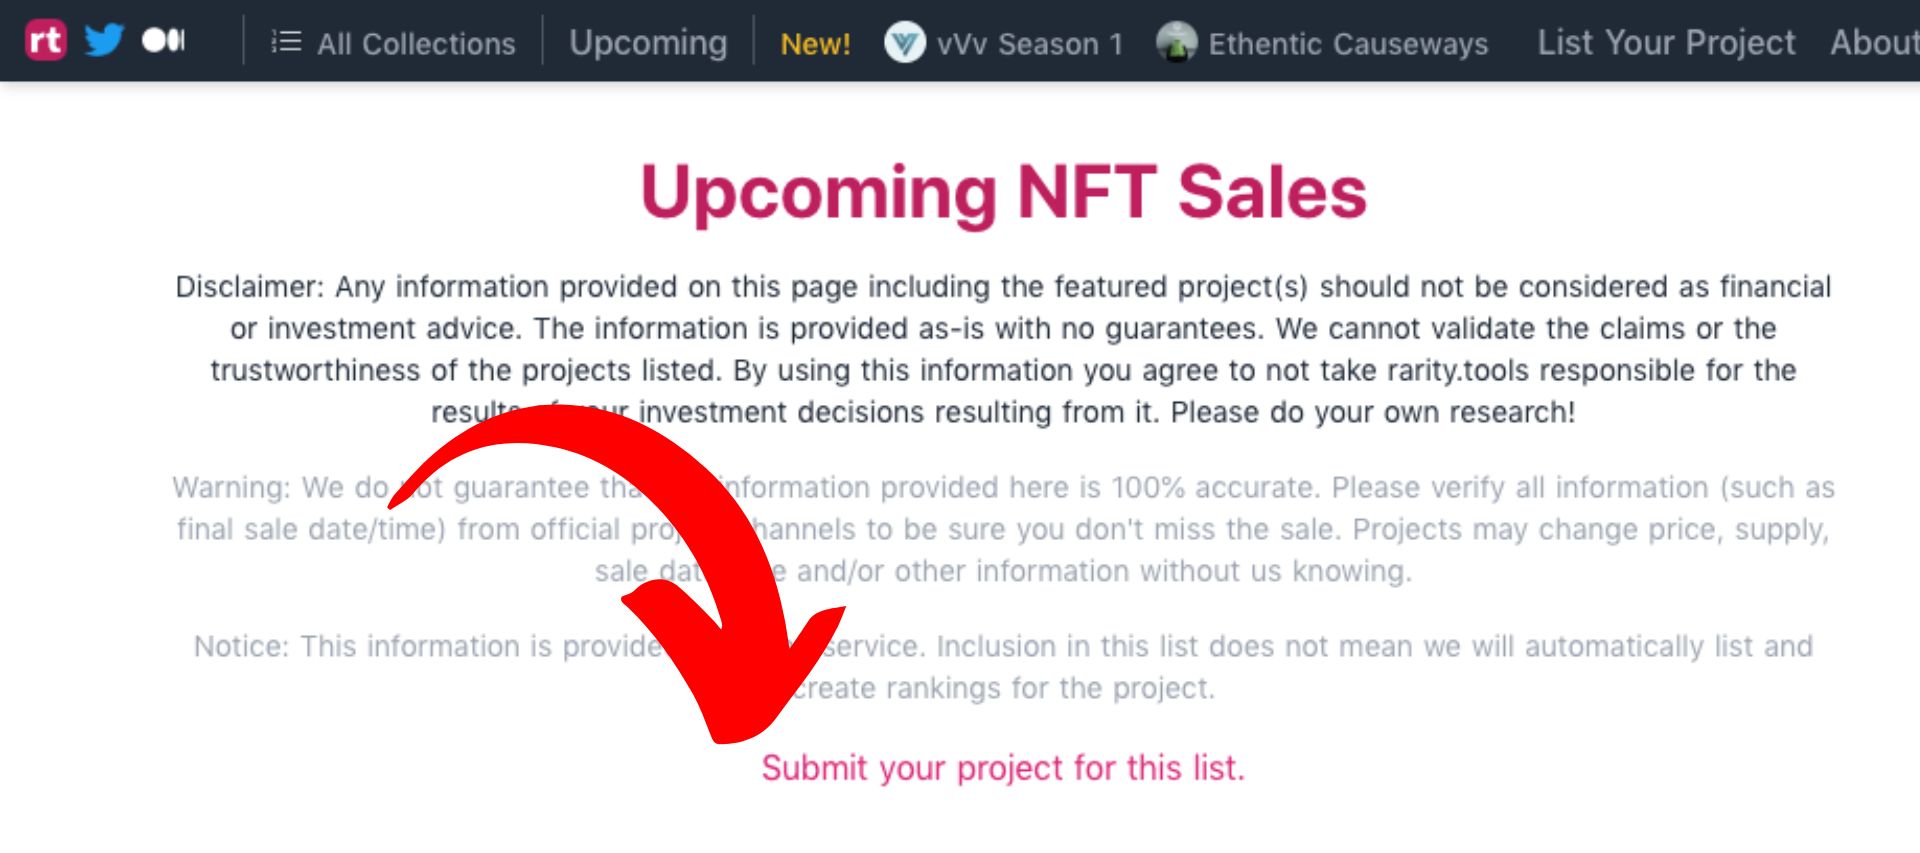 One nft marketing strategies is to submit your nft collection to all the upcoming nft website to get free nft traffic for your nft marketing campaign